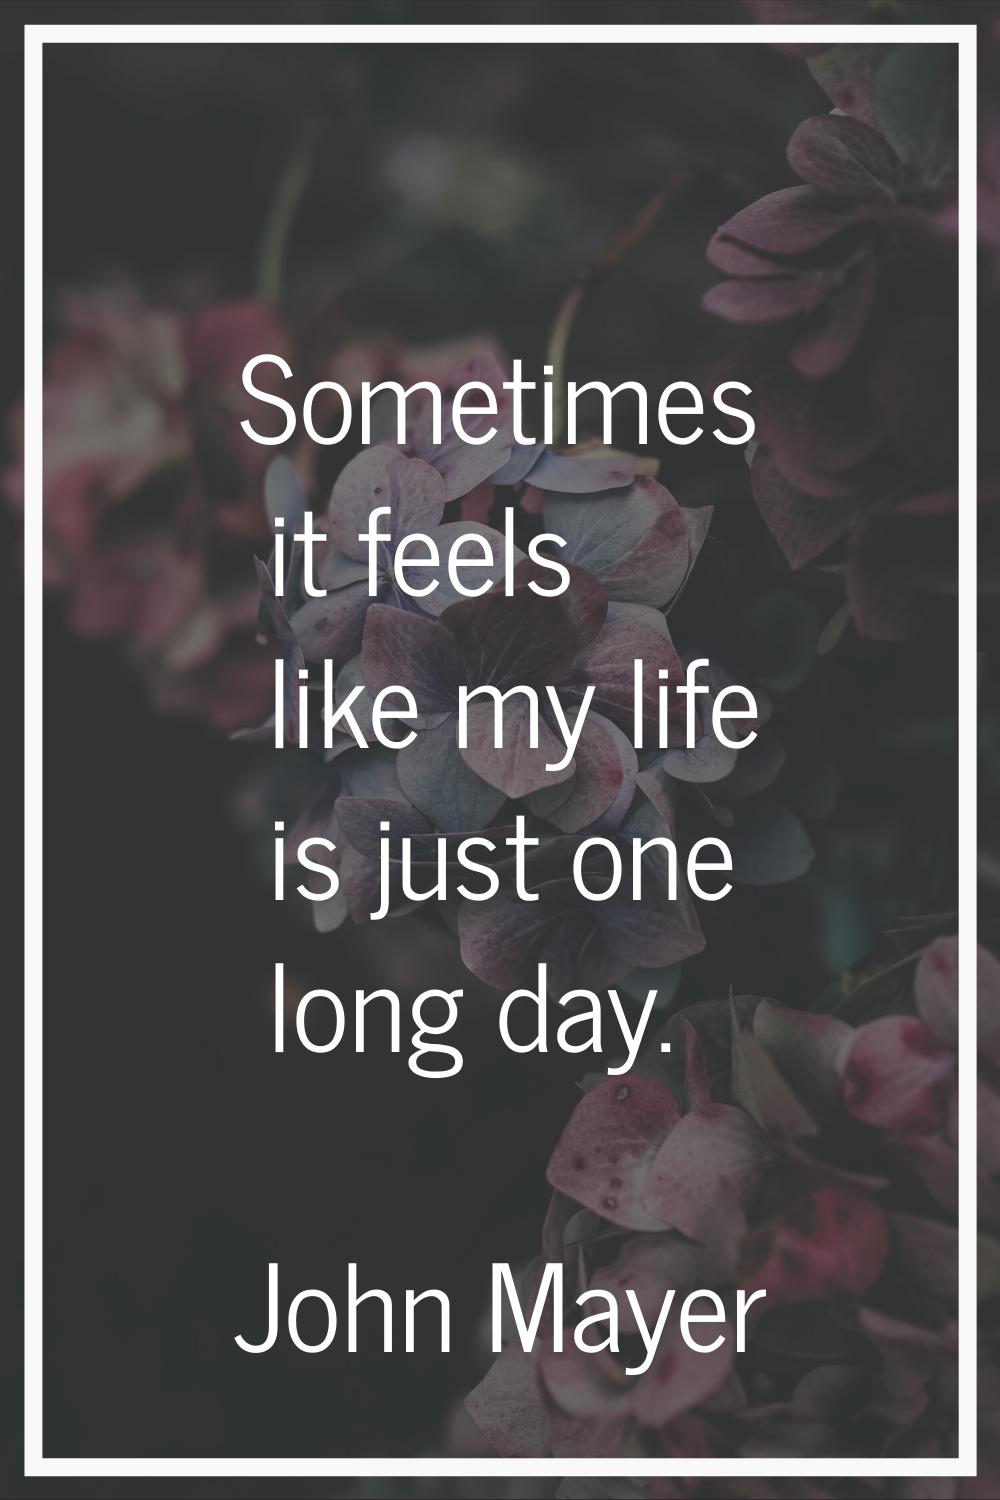 Sometimes it feels like my life is just one long day.